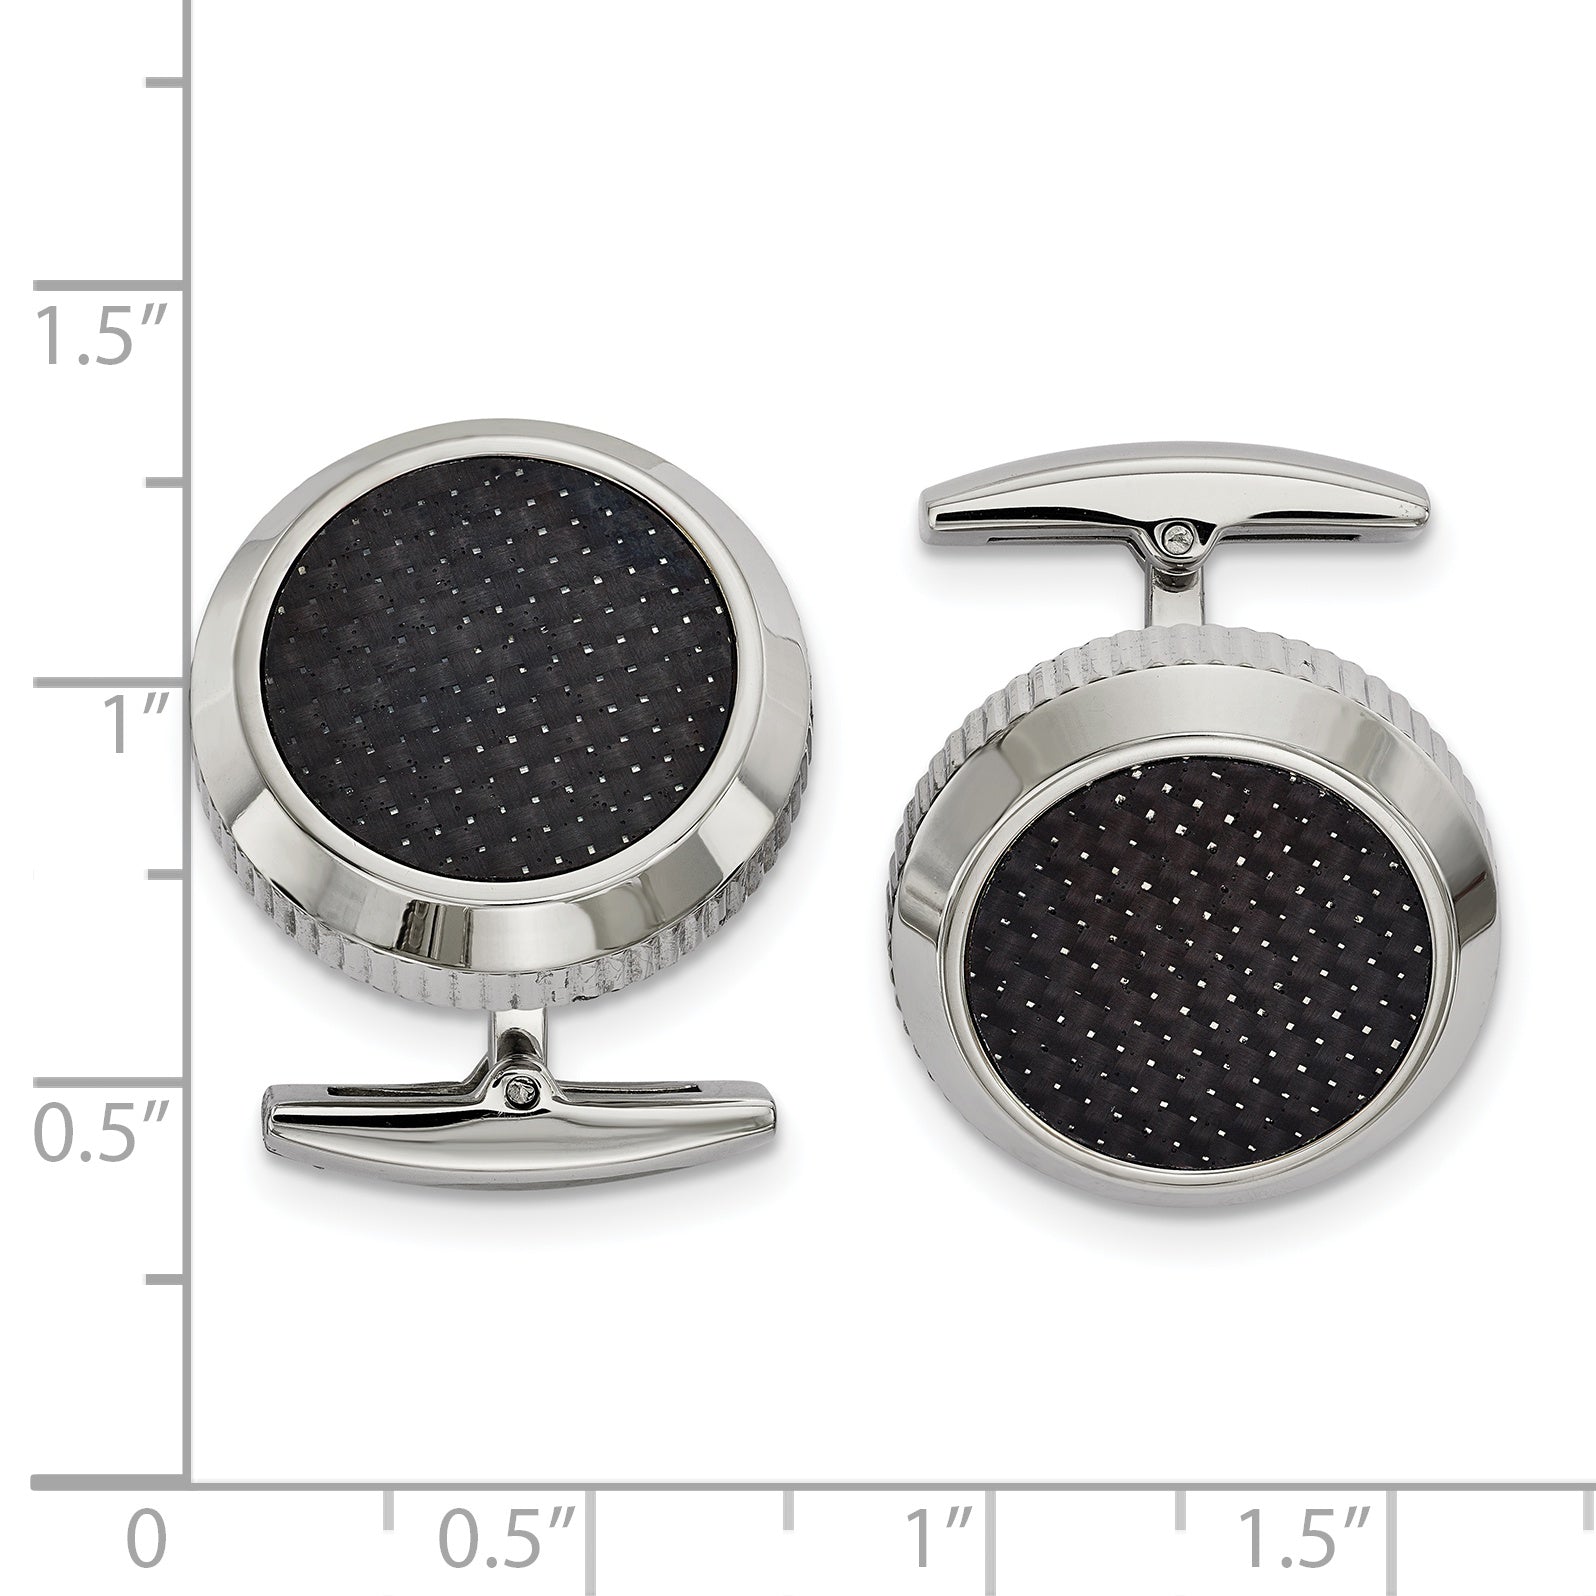 Chisel Stainless Steel Polished and Textured Black Carbon Fiber Inlay Cufflinks